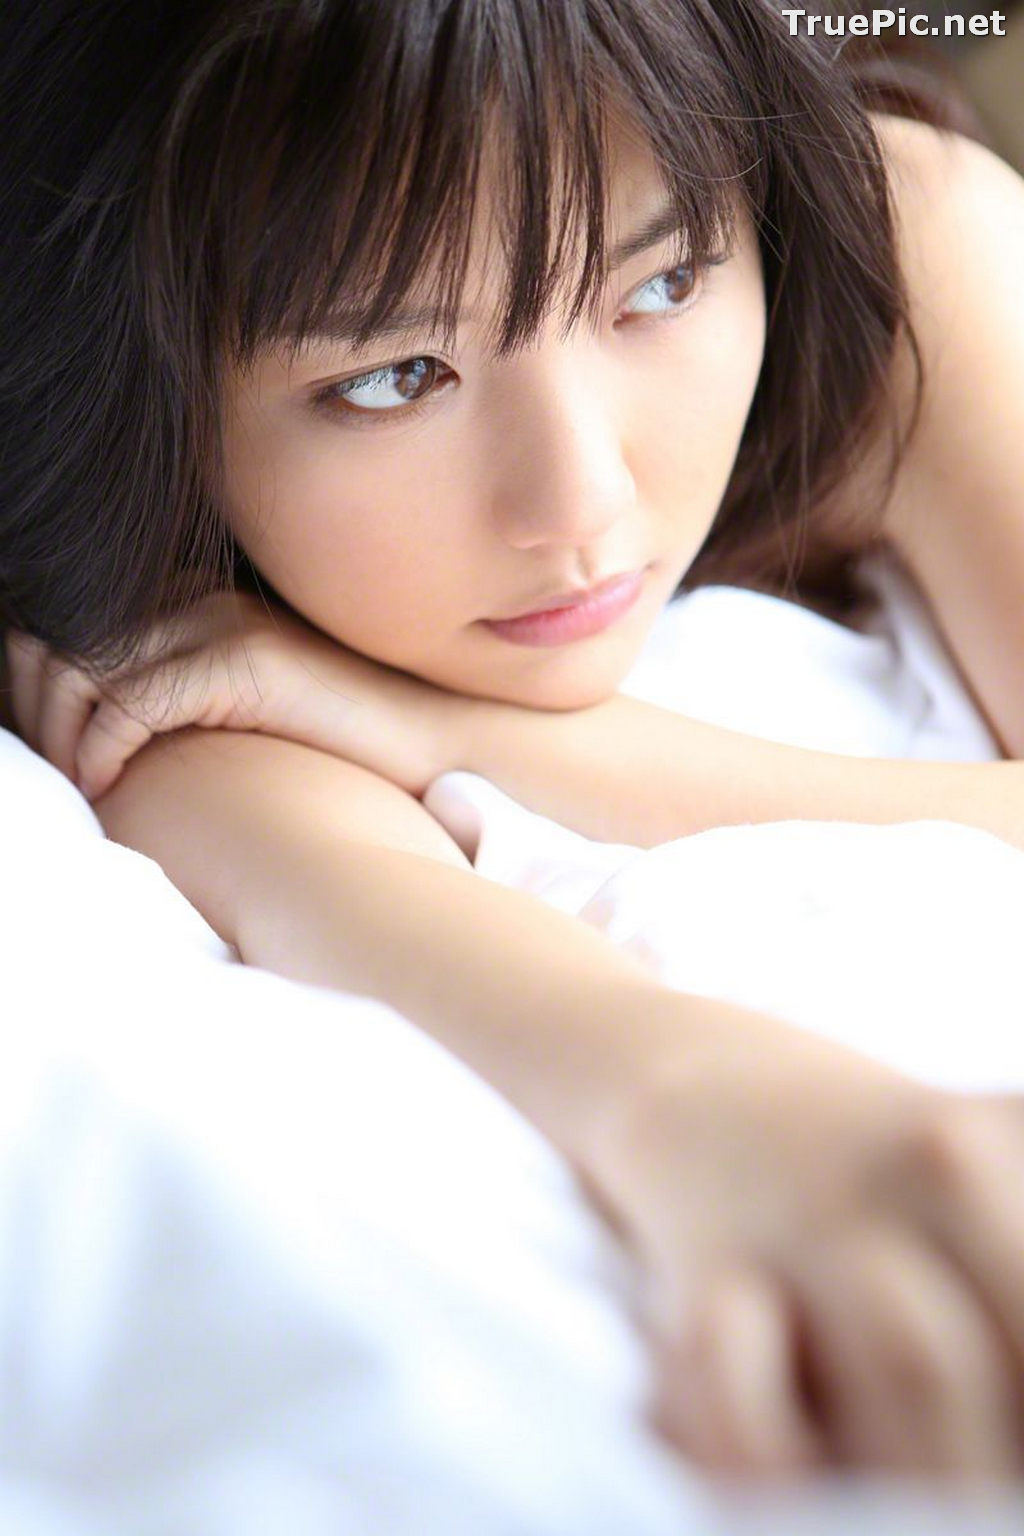 Image [WBGC Photograph] No.131 - Japanese Singer and Actress - Erina Mano - TruePic.net - Picture-159